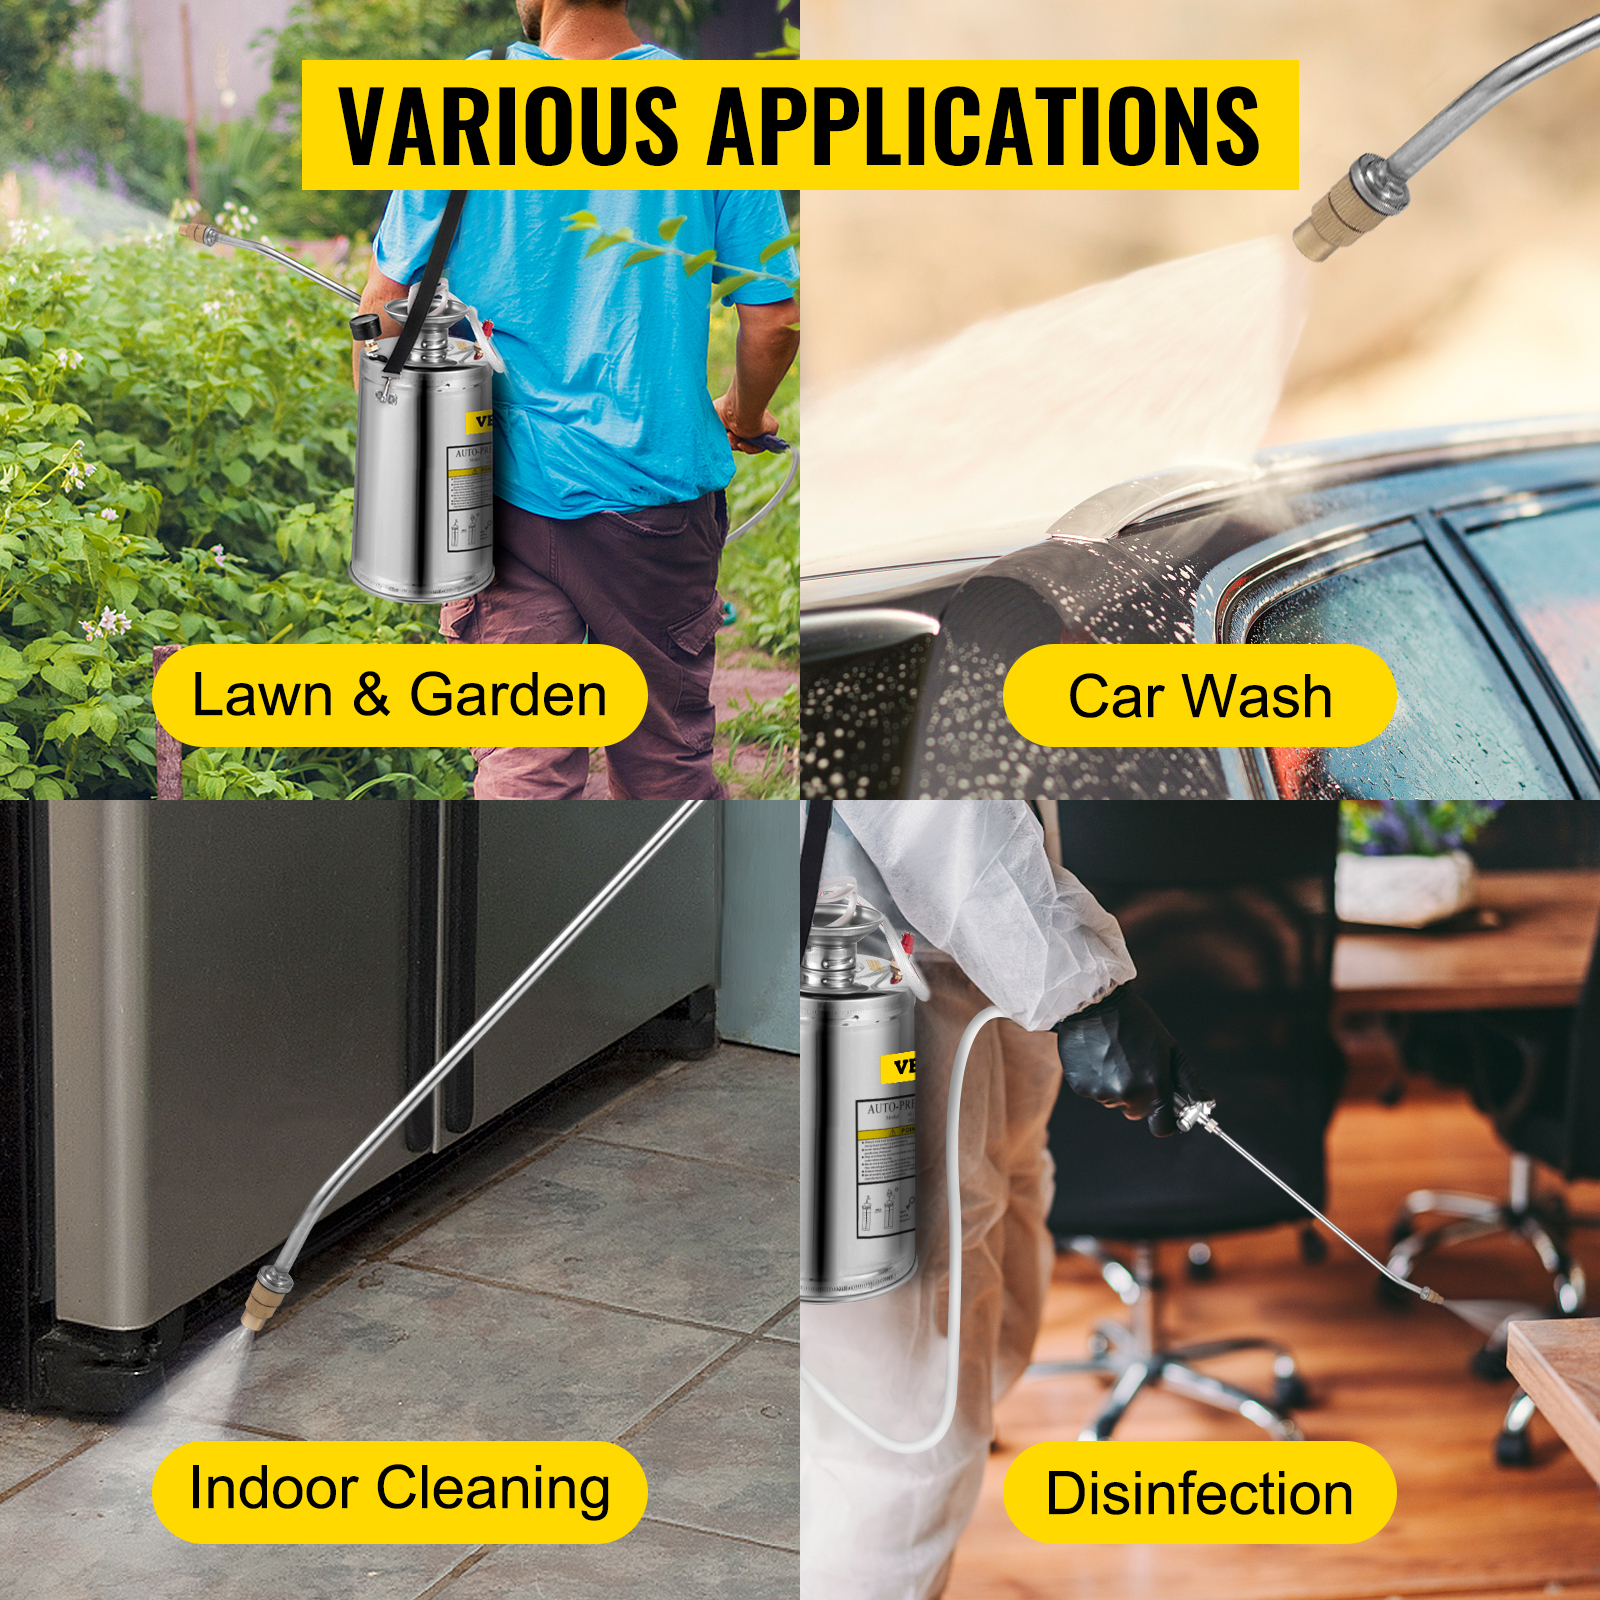 VEVOR VEVOR Stainless Steel 6L Household Gardening and Floor Cleaning Sprayer, for the Current Neds of Industry, Agriculture, Commerce, Medicine and Other Industries | VEVOR EU